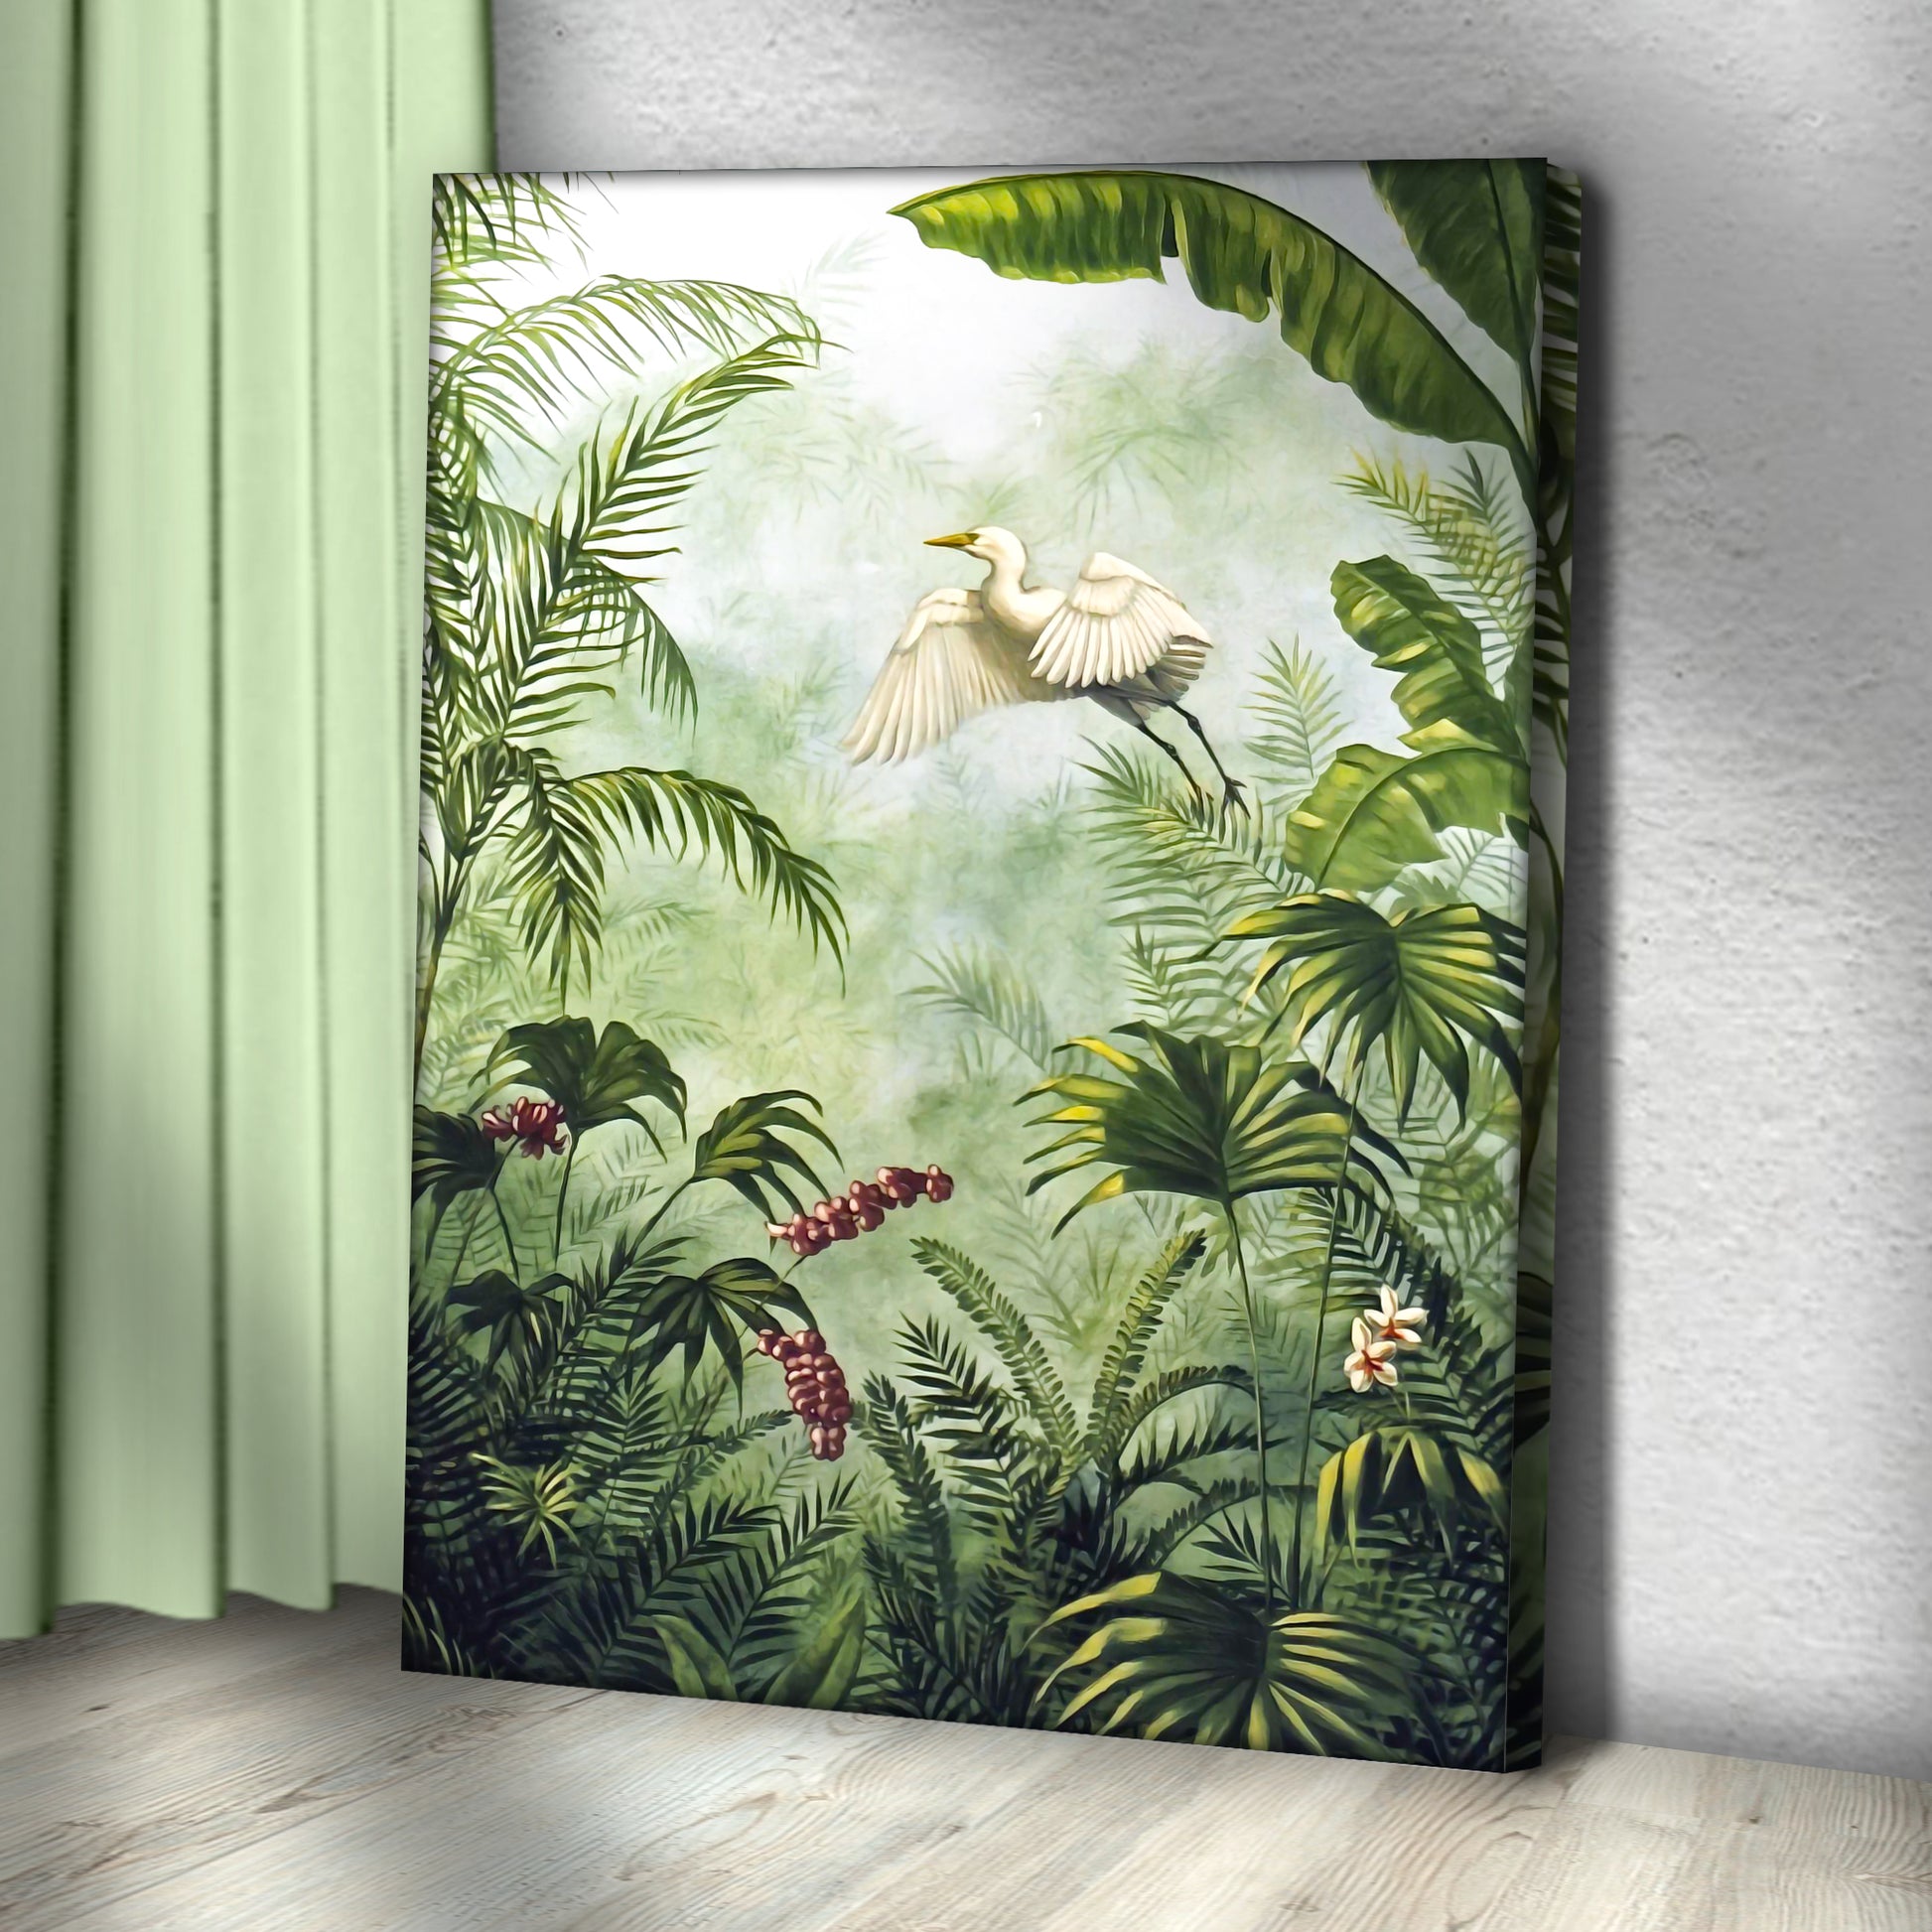 Tropical Egret Canvas Wall Art Style 1 - Image by Tailored Canvases